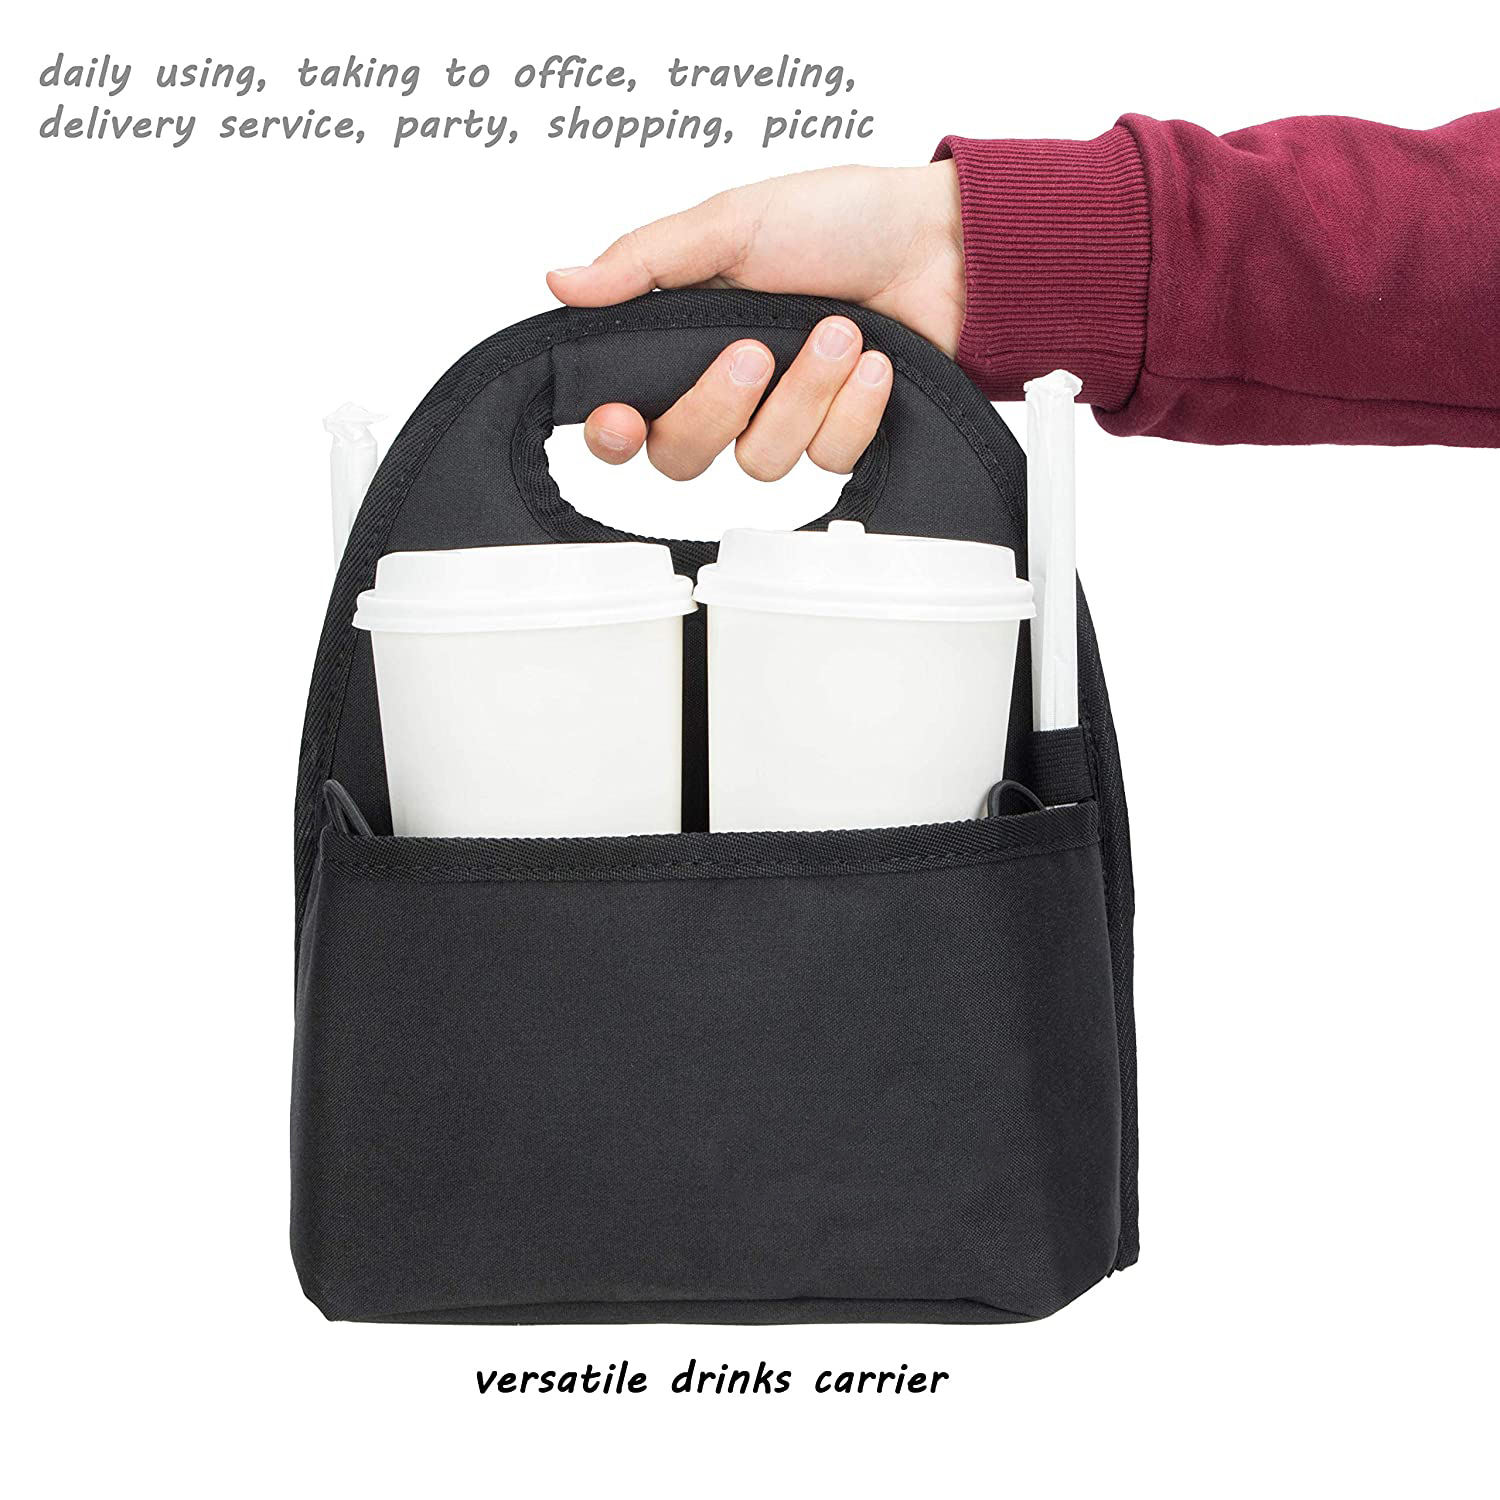 Luggage Travel Drink Bag Cup Holder Free Your Hand For Drink Beverages Coffee Fits All Suitcase Handles